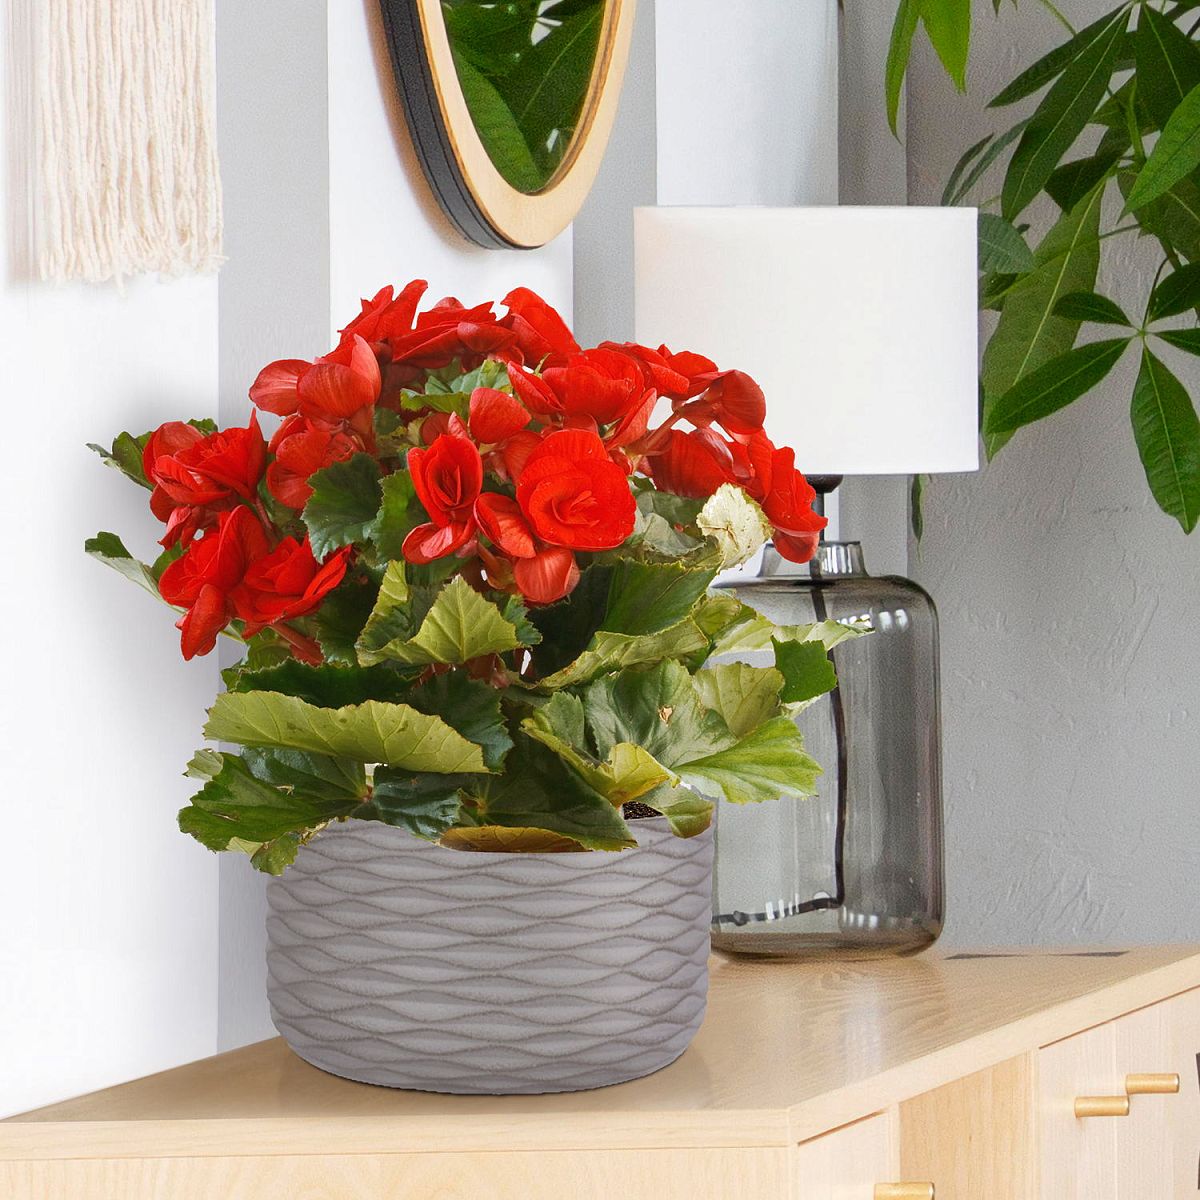 Wave Style Table and Hanging Cylinder Round Plant Pot Dual Use Indoor Planter by Idealist Lite